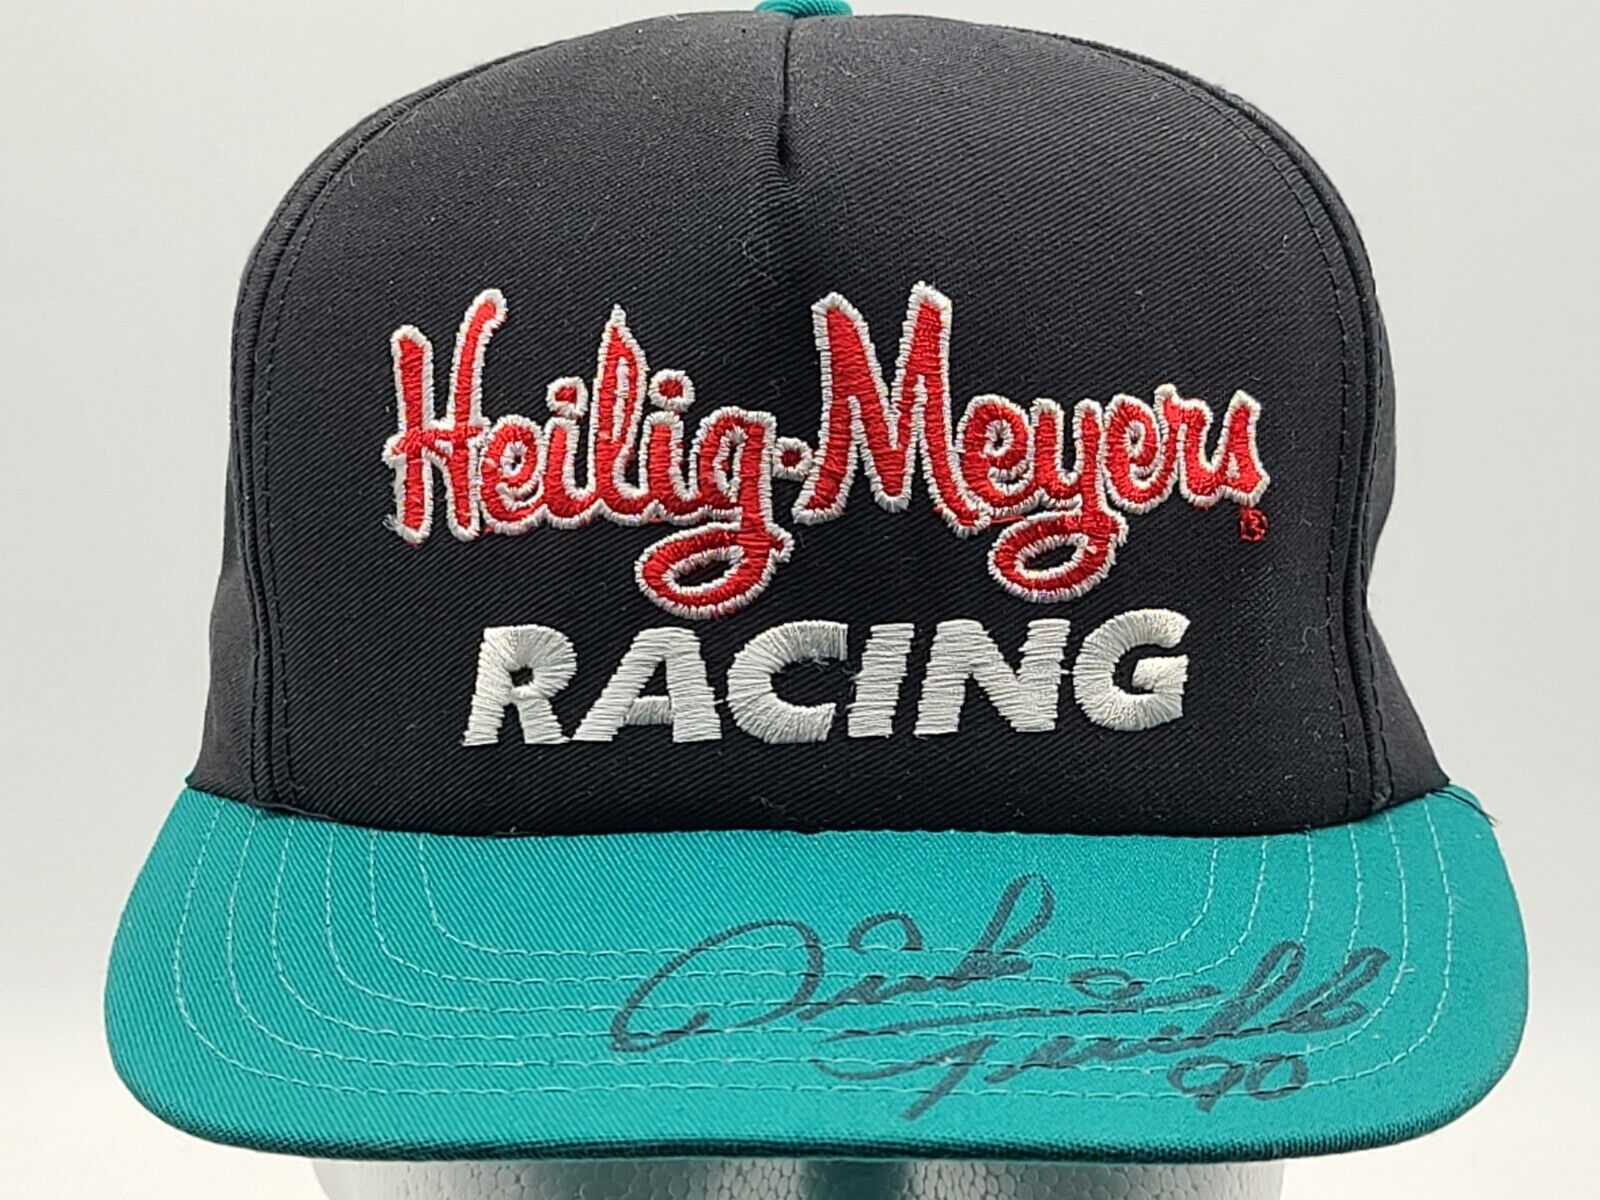 Max 55% OFF VTG DICK TRICKLE AUTOGRAPHED Cheap sale #90 TR SNAPBACK RACING HEILIG-MYERS